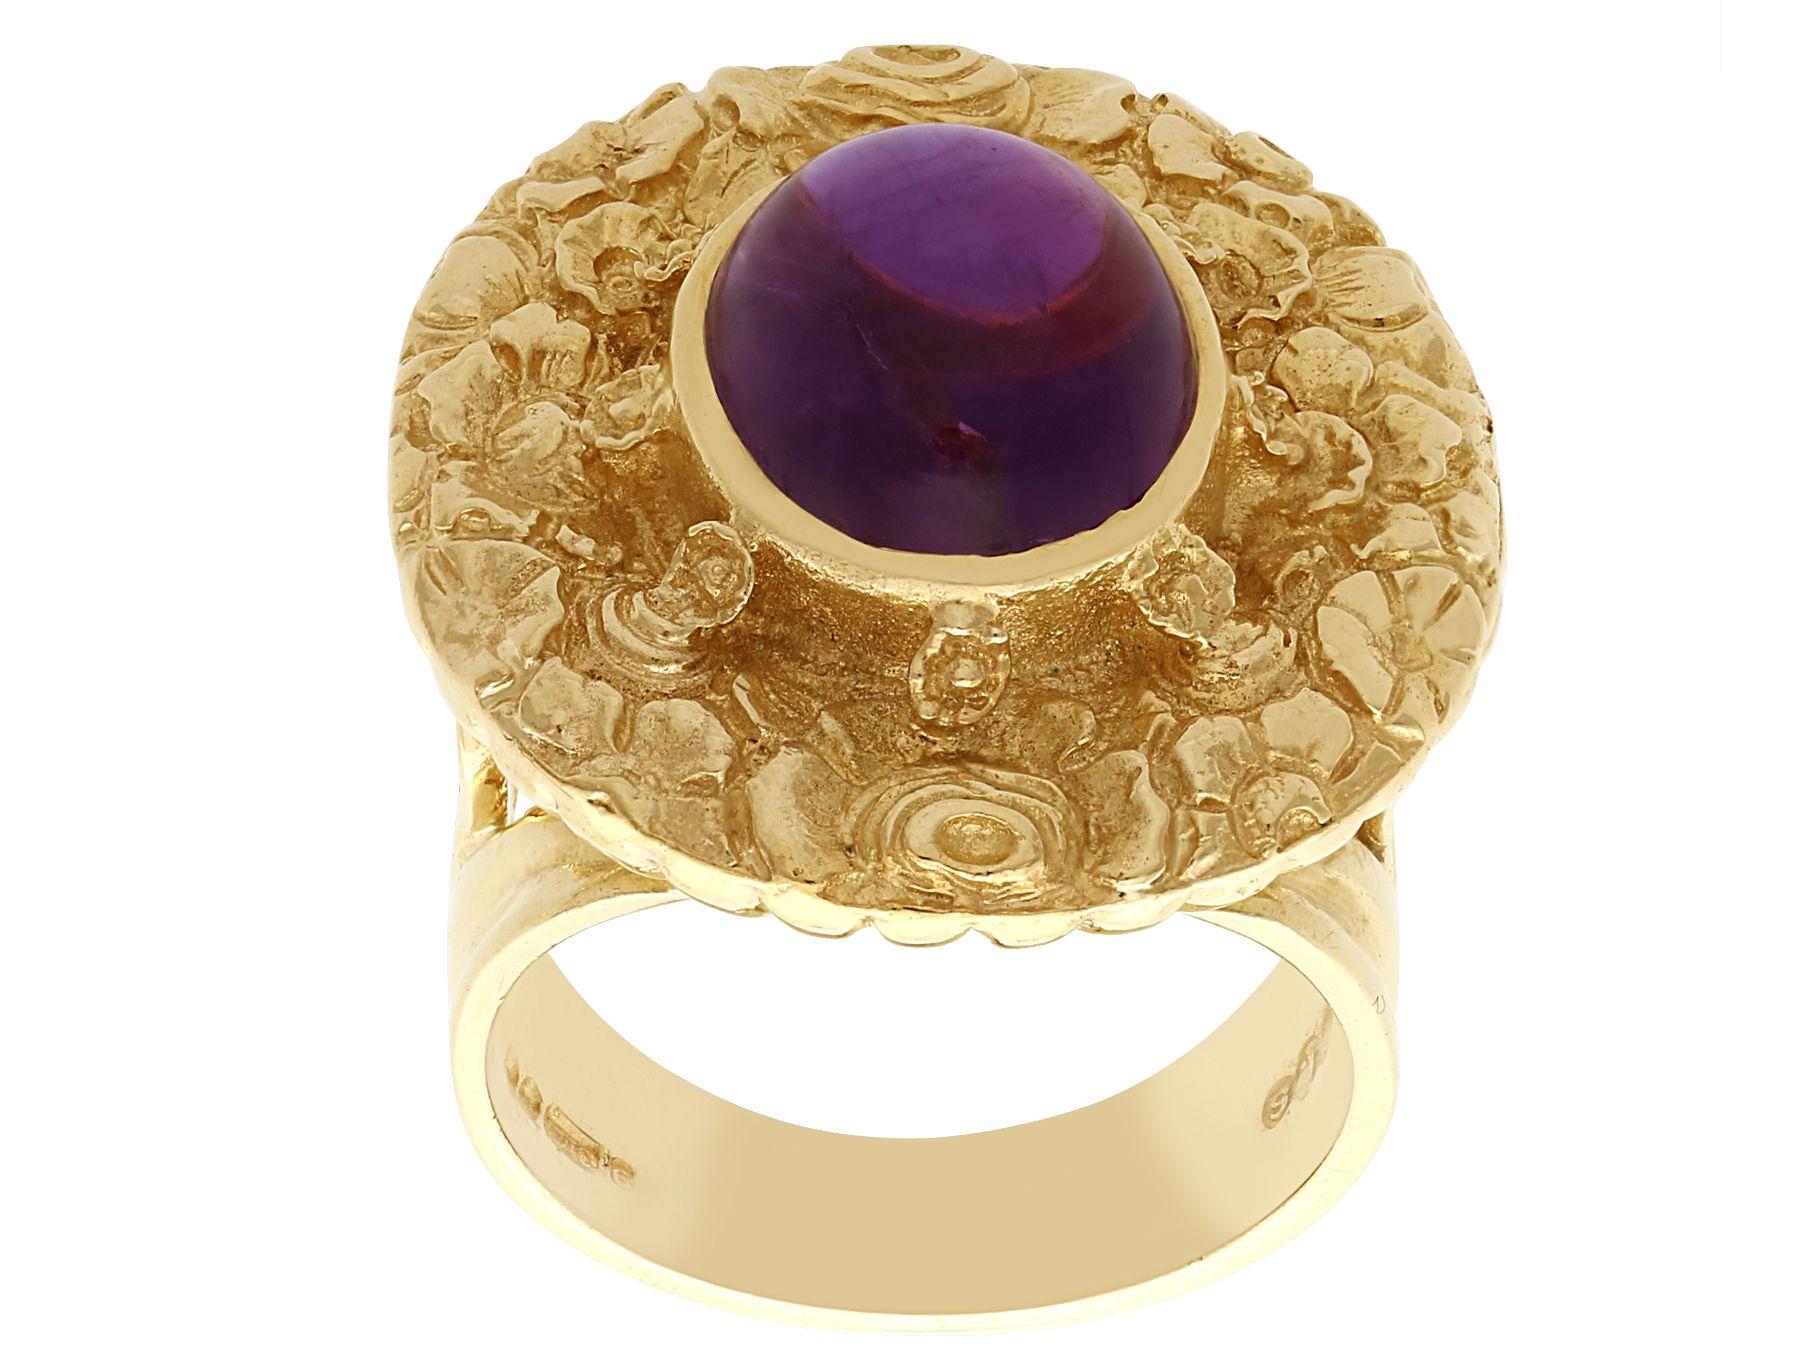 Vintage 1970s 3.77 Carat Amethyst and Yellow Gold Cocktail Ring In Excellent Condition For Sale In Jesmond, Newcastle Upon Tyne